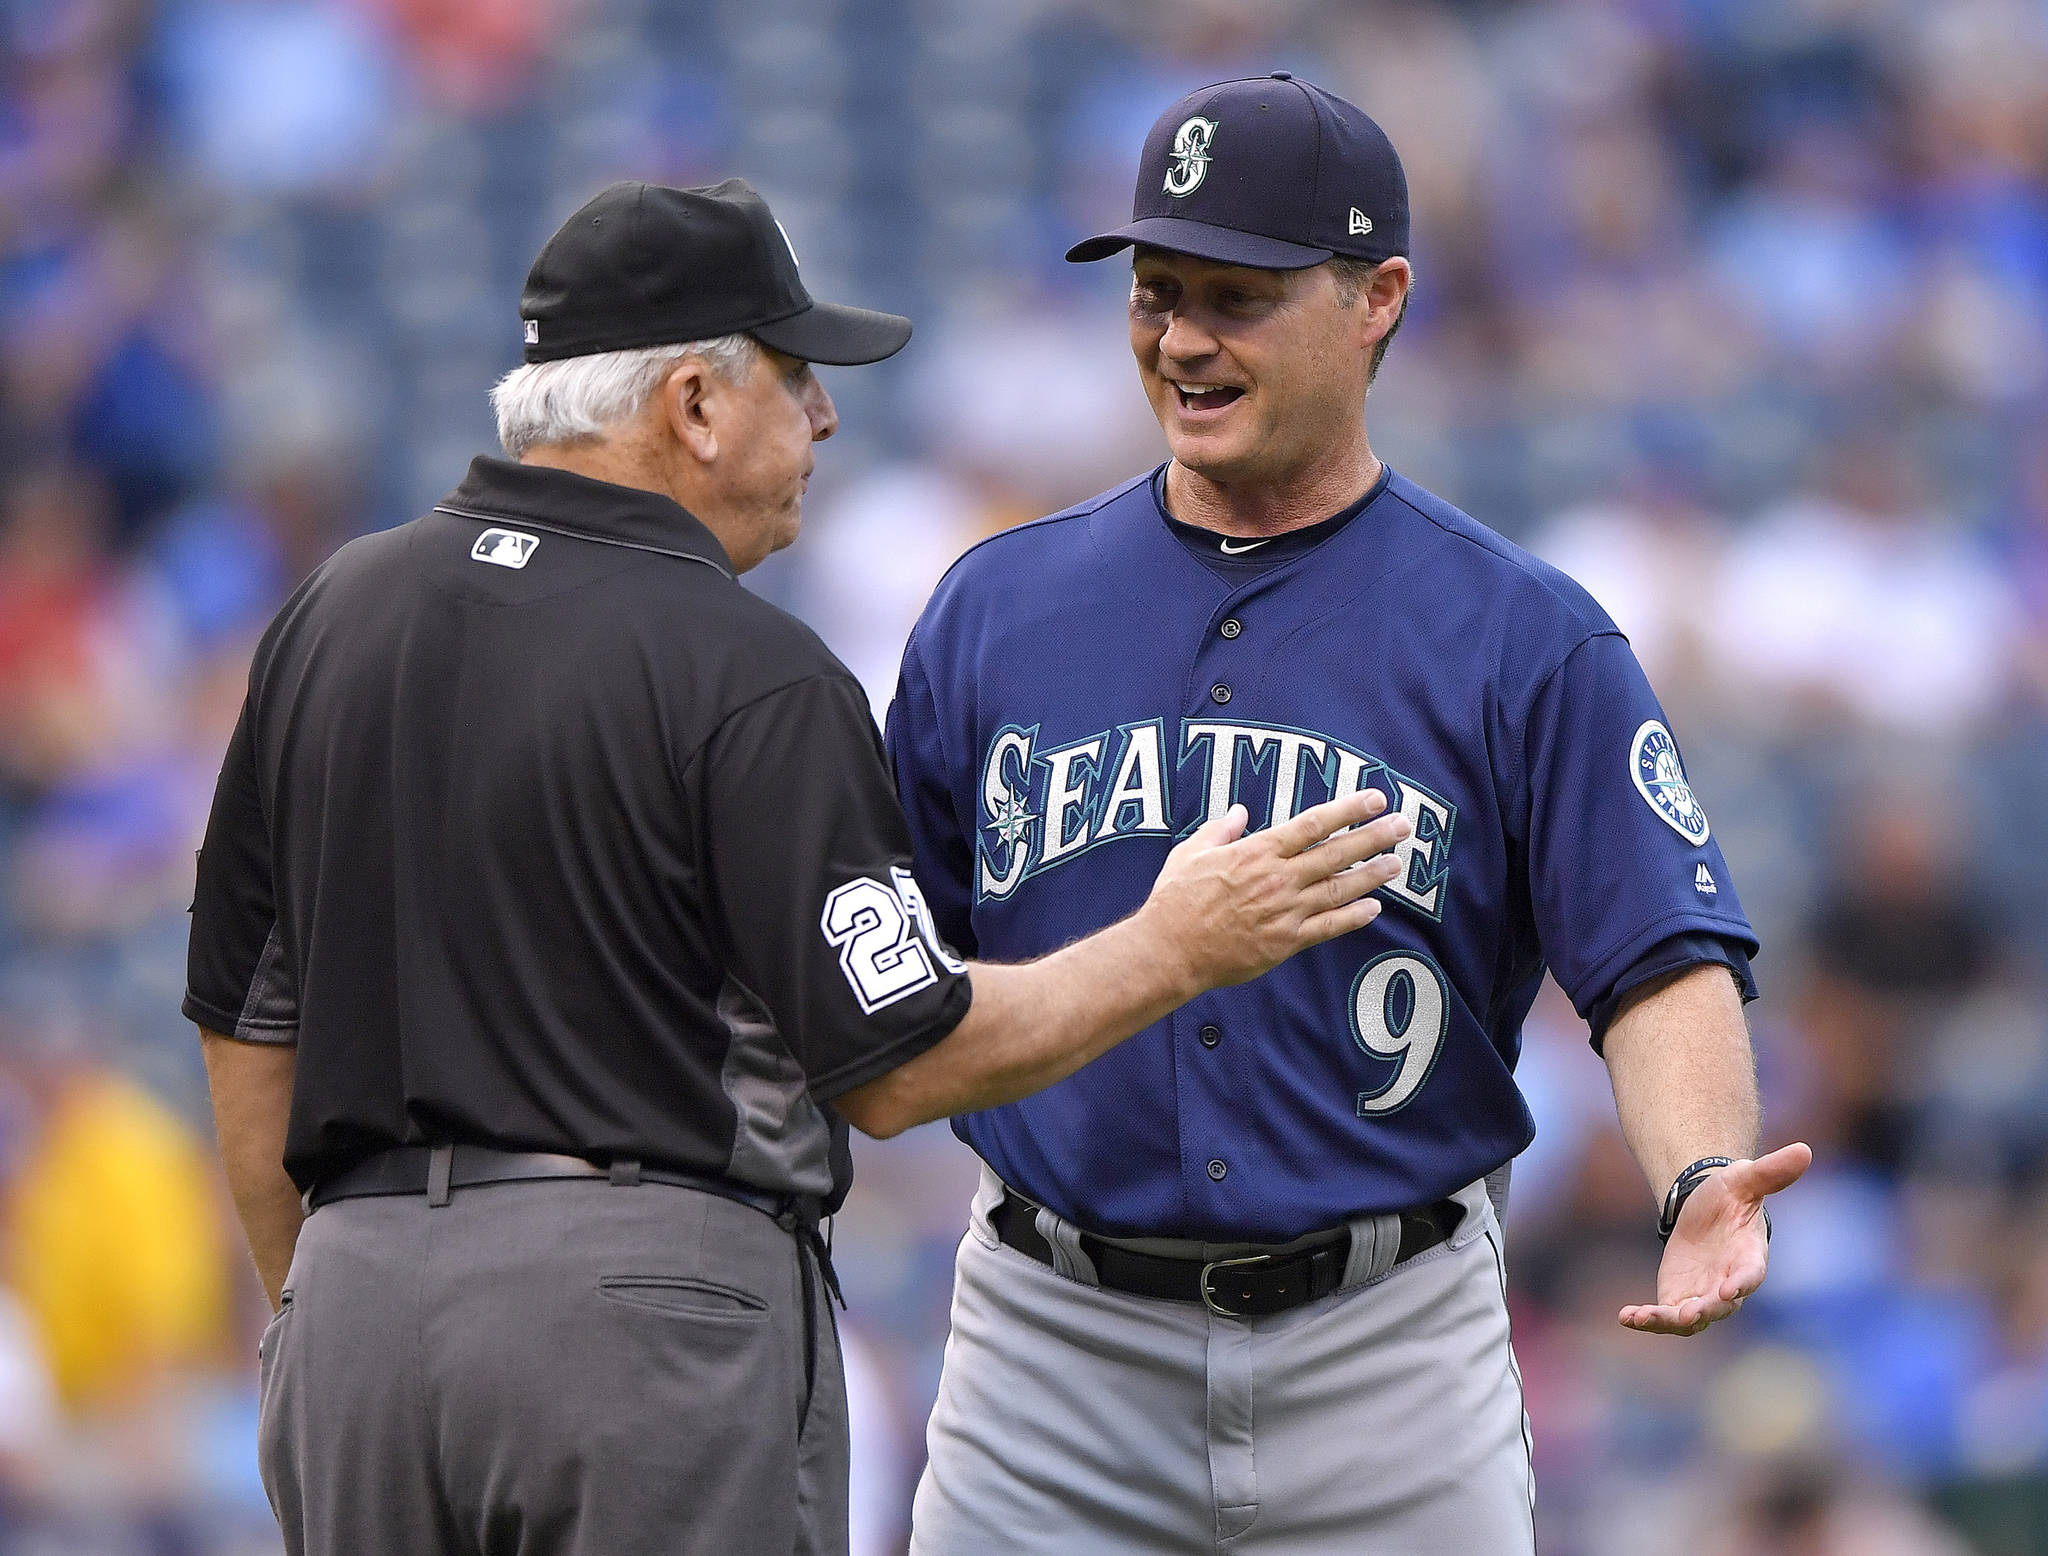 Anderson: As far as Mariners managers are concerned, Servais